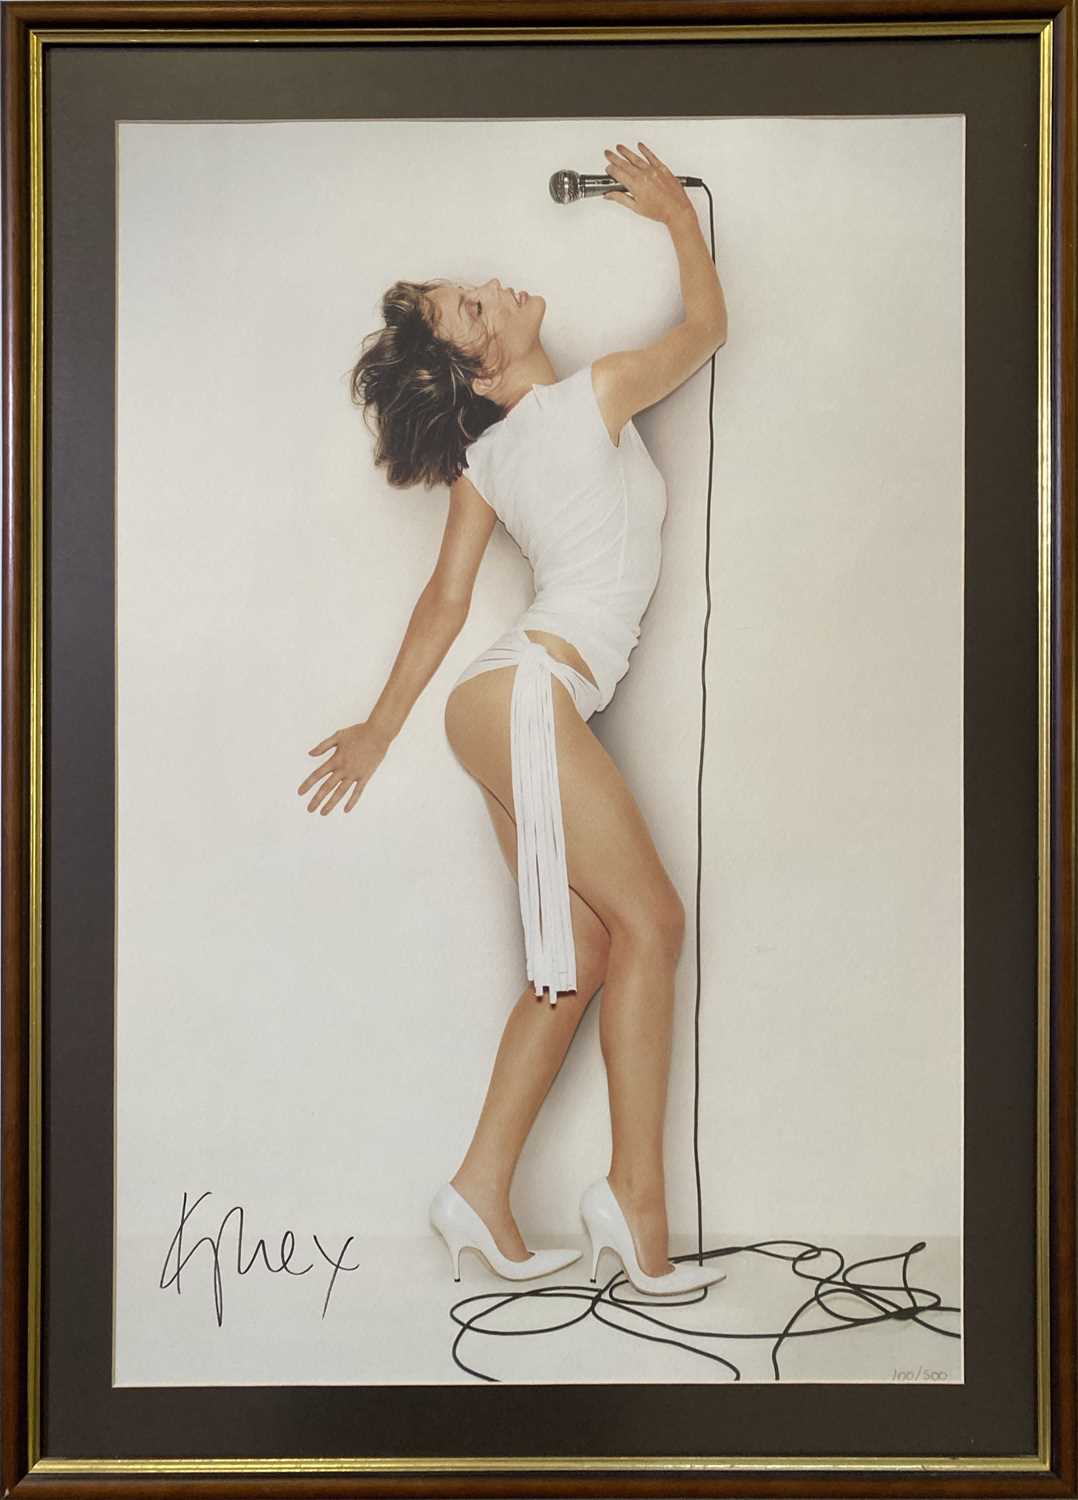 KYLIE MINOGUE SIGNED POSTER.